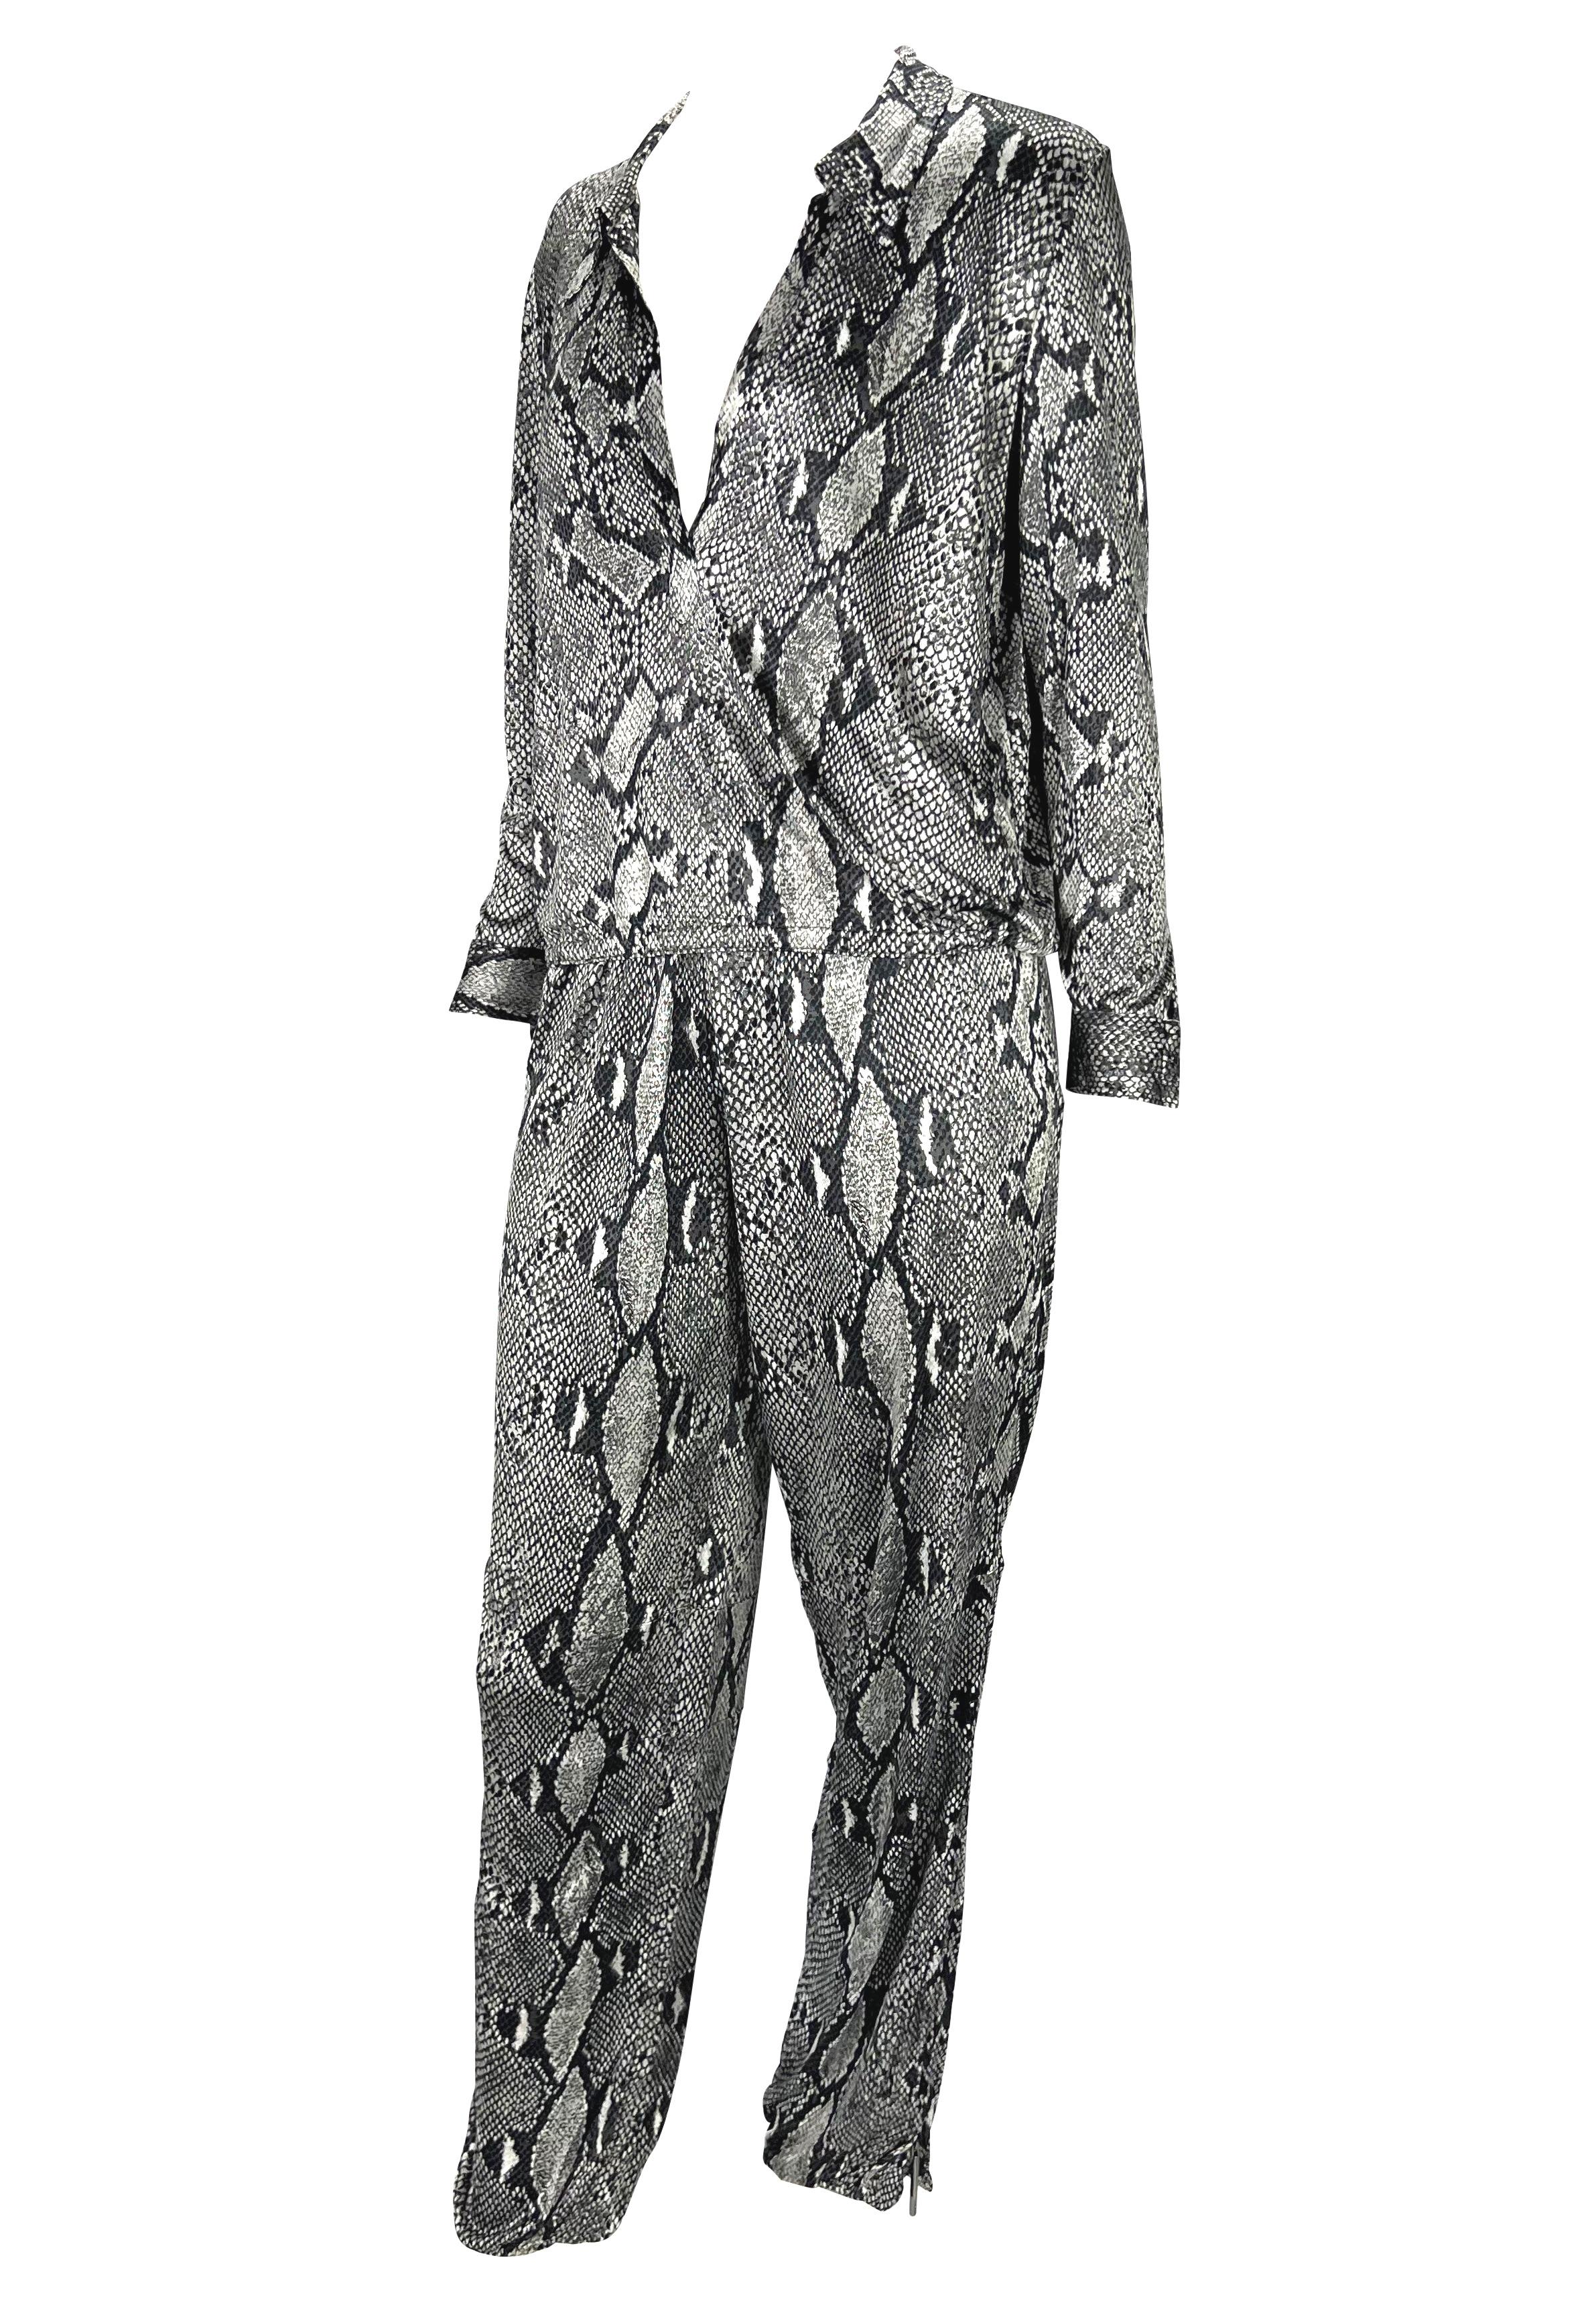 Women's S/S 2000 Gucci by Tom Ford Black White Snakeskin Logo Print Viscose Pant Set For Sale